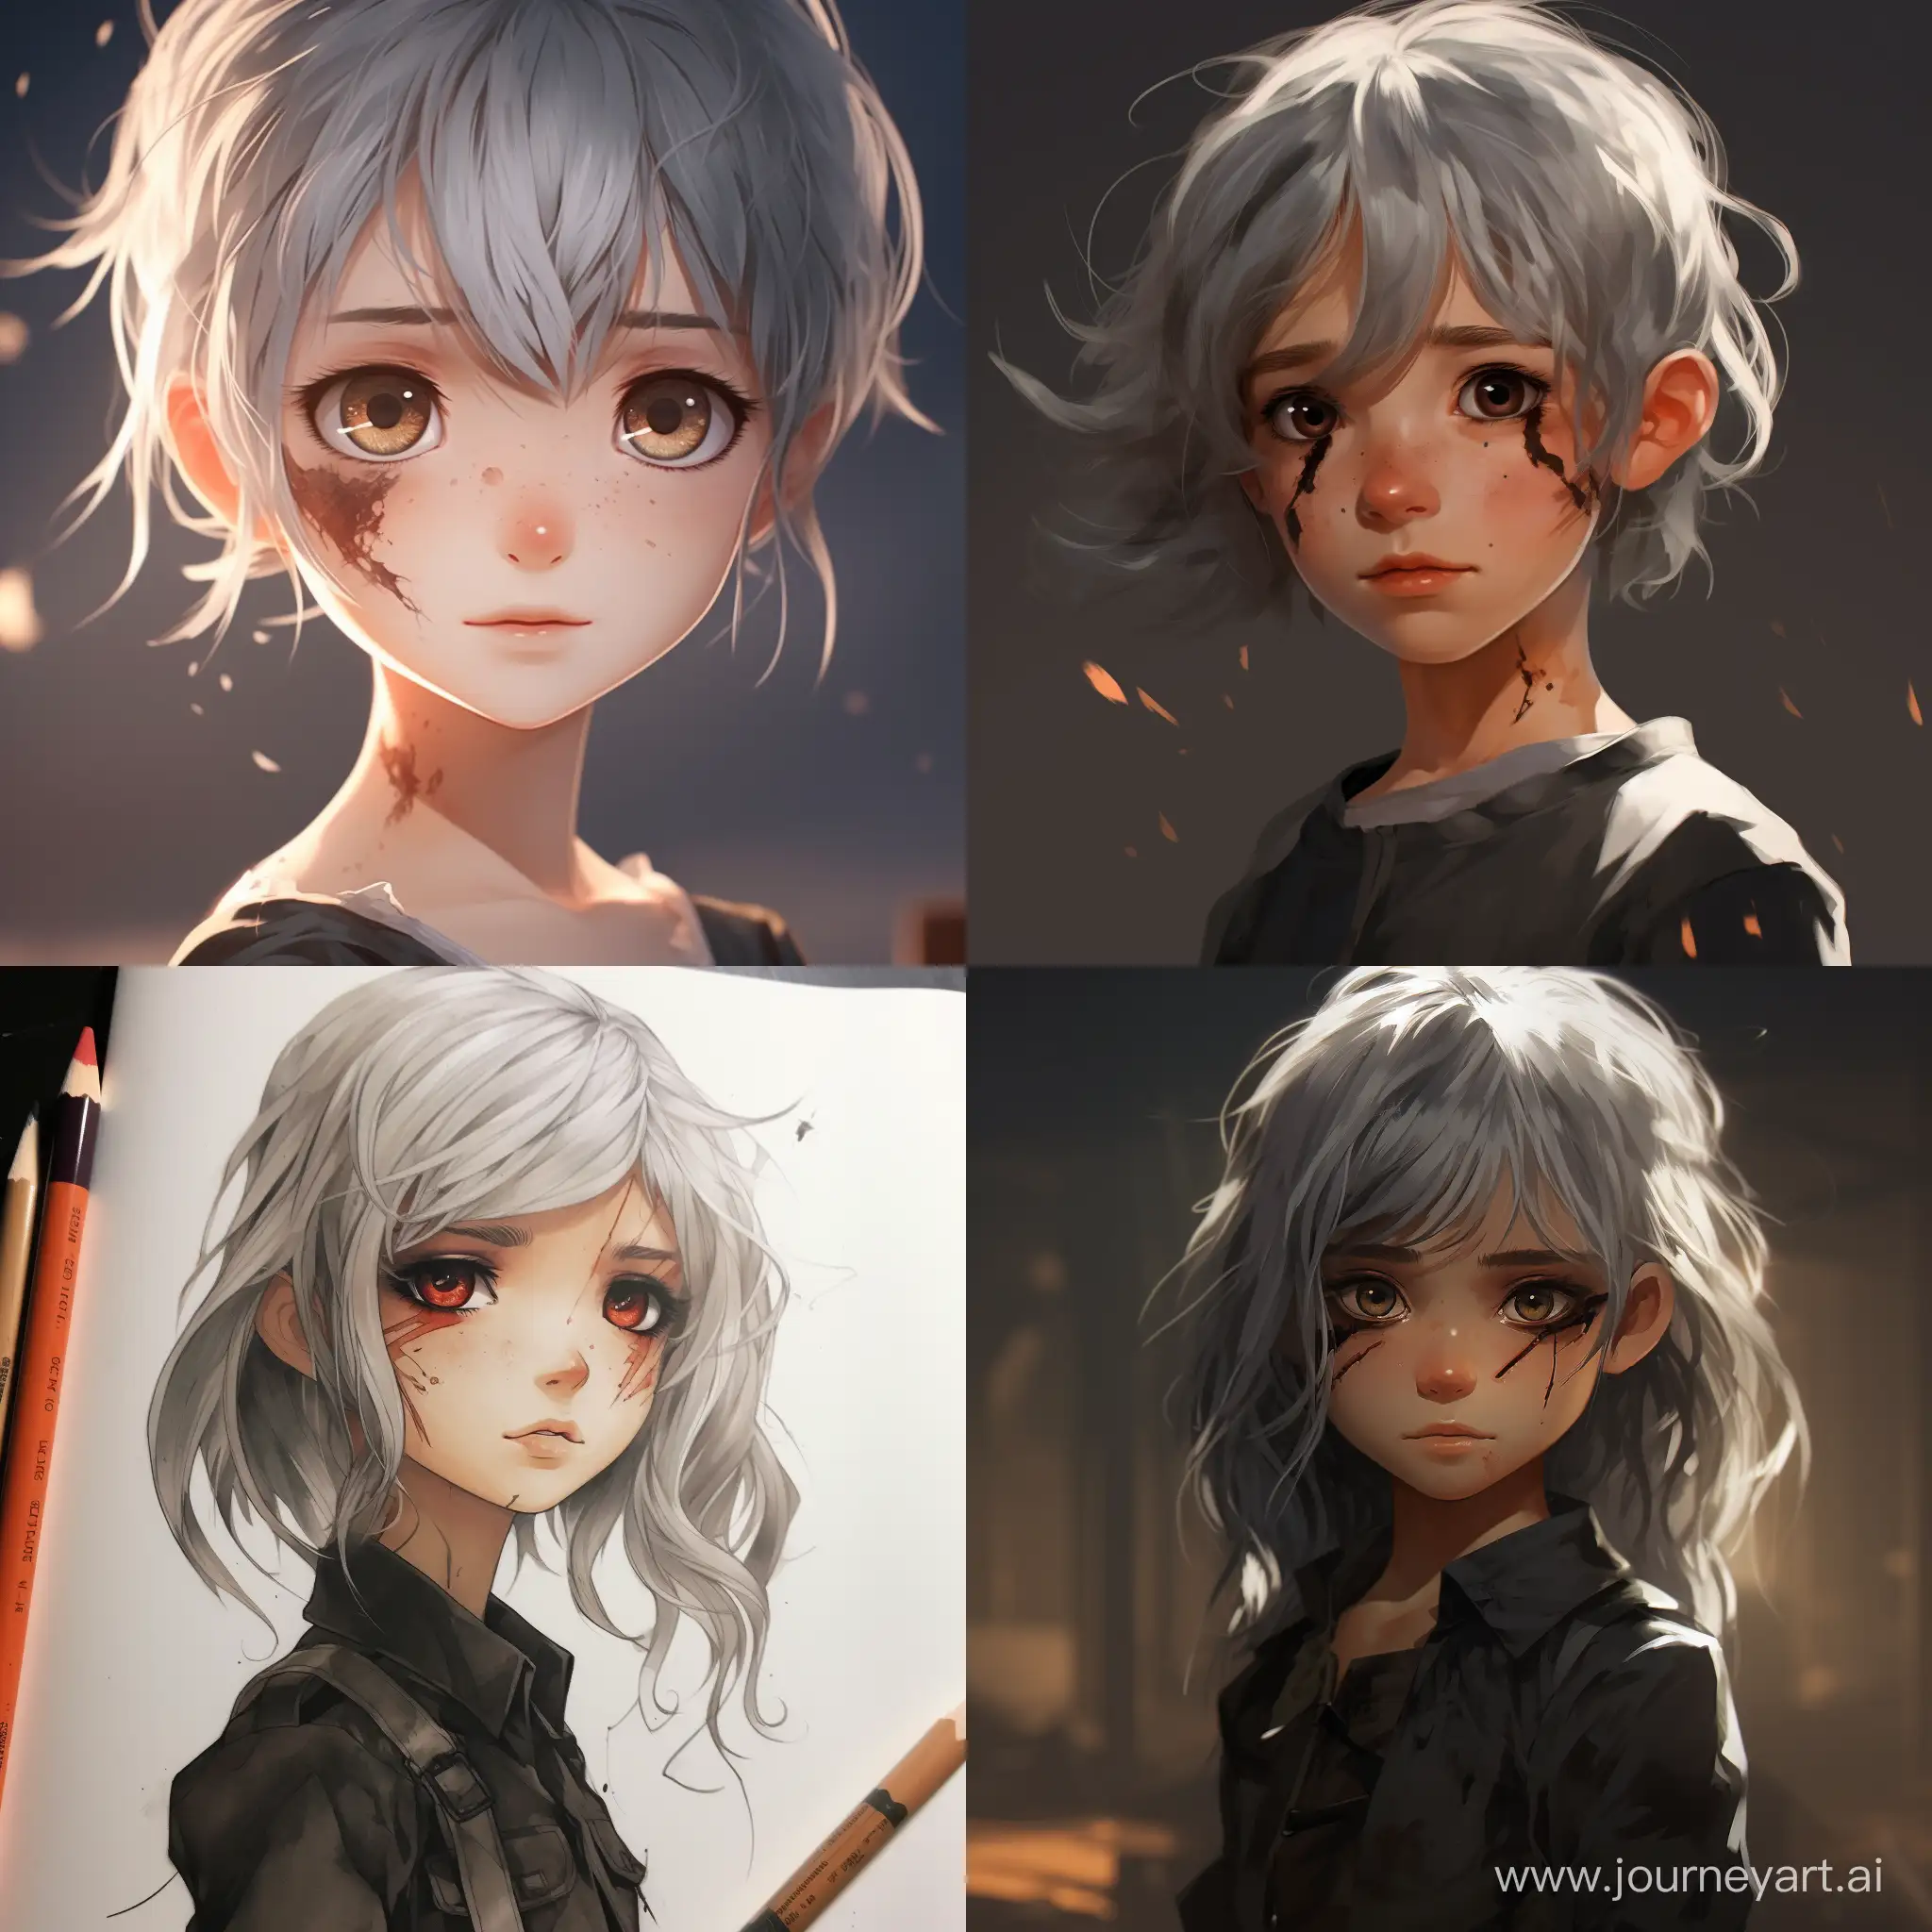 Anime-Style-Portrait-Enigmatic-Little-Girl-with-Gray-Hair-and-Burn-Mark